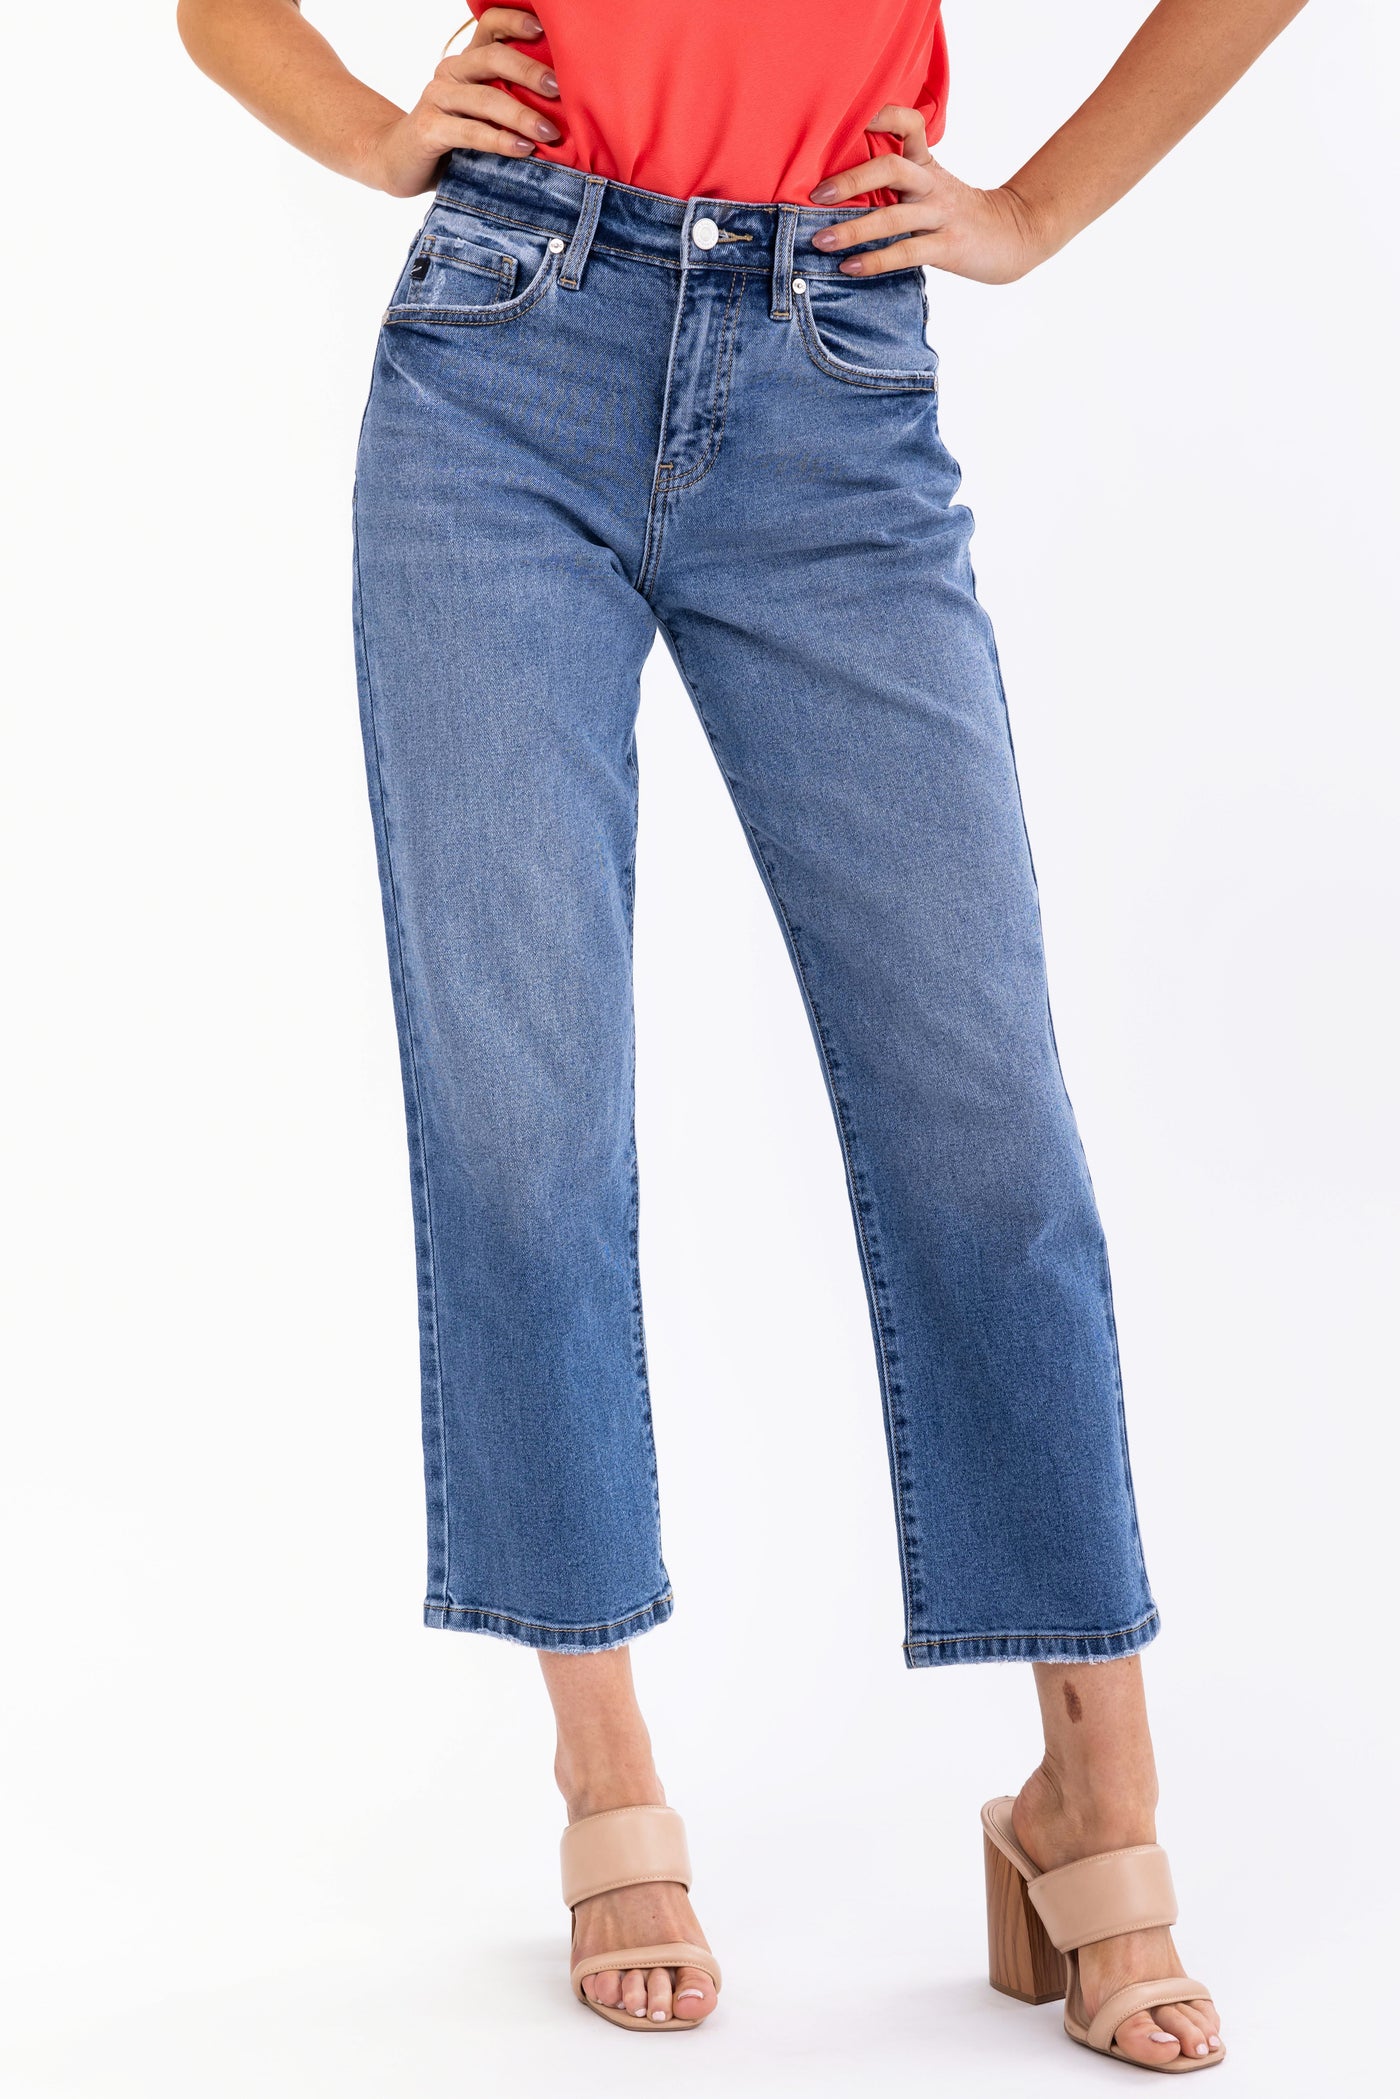 KanCan Comfort Stretch High Rise Straight Jeans